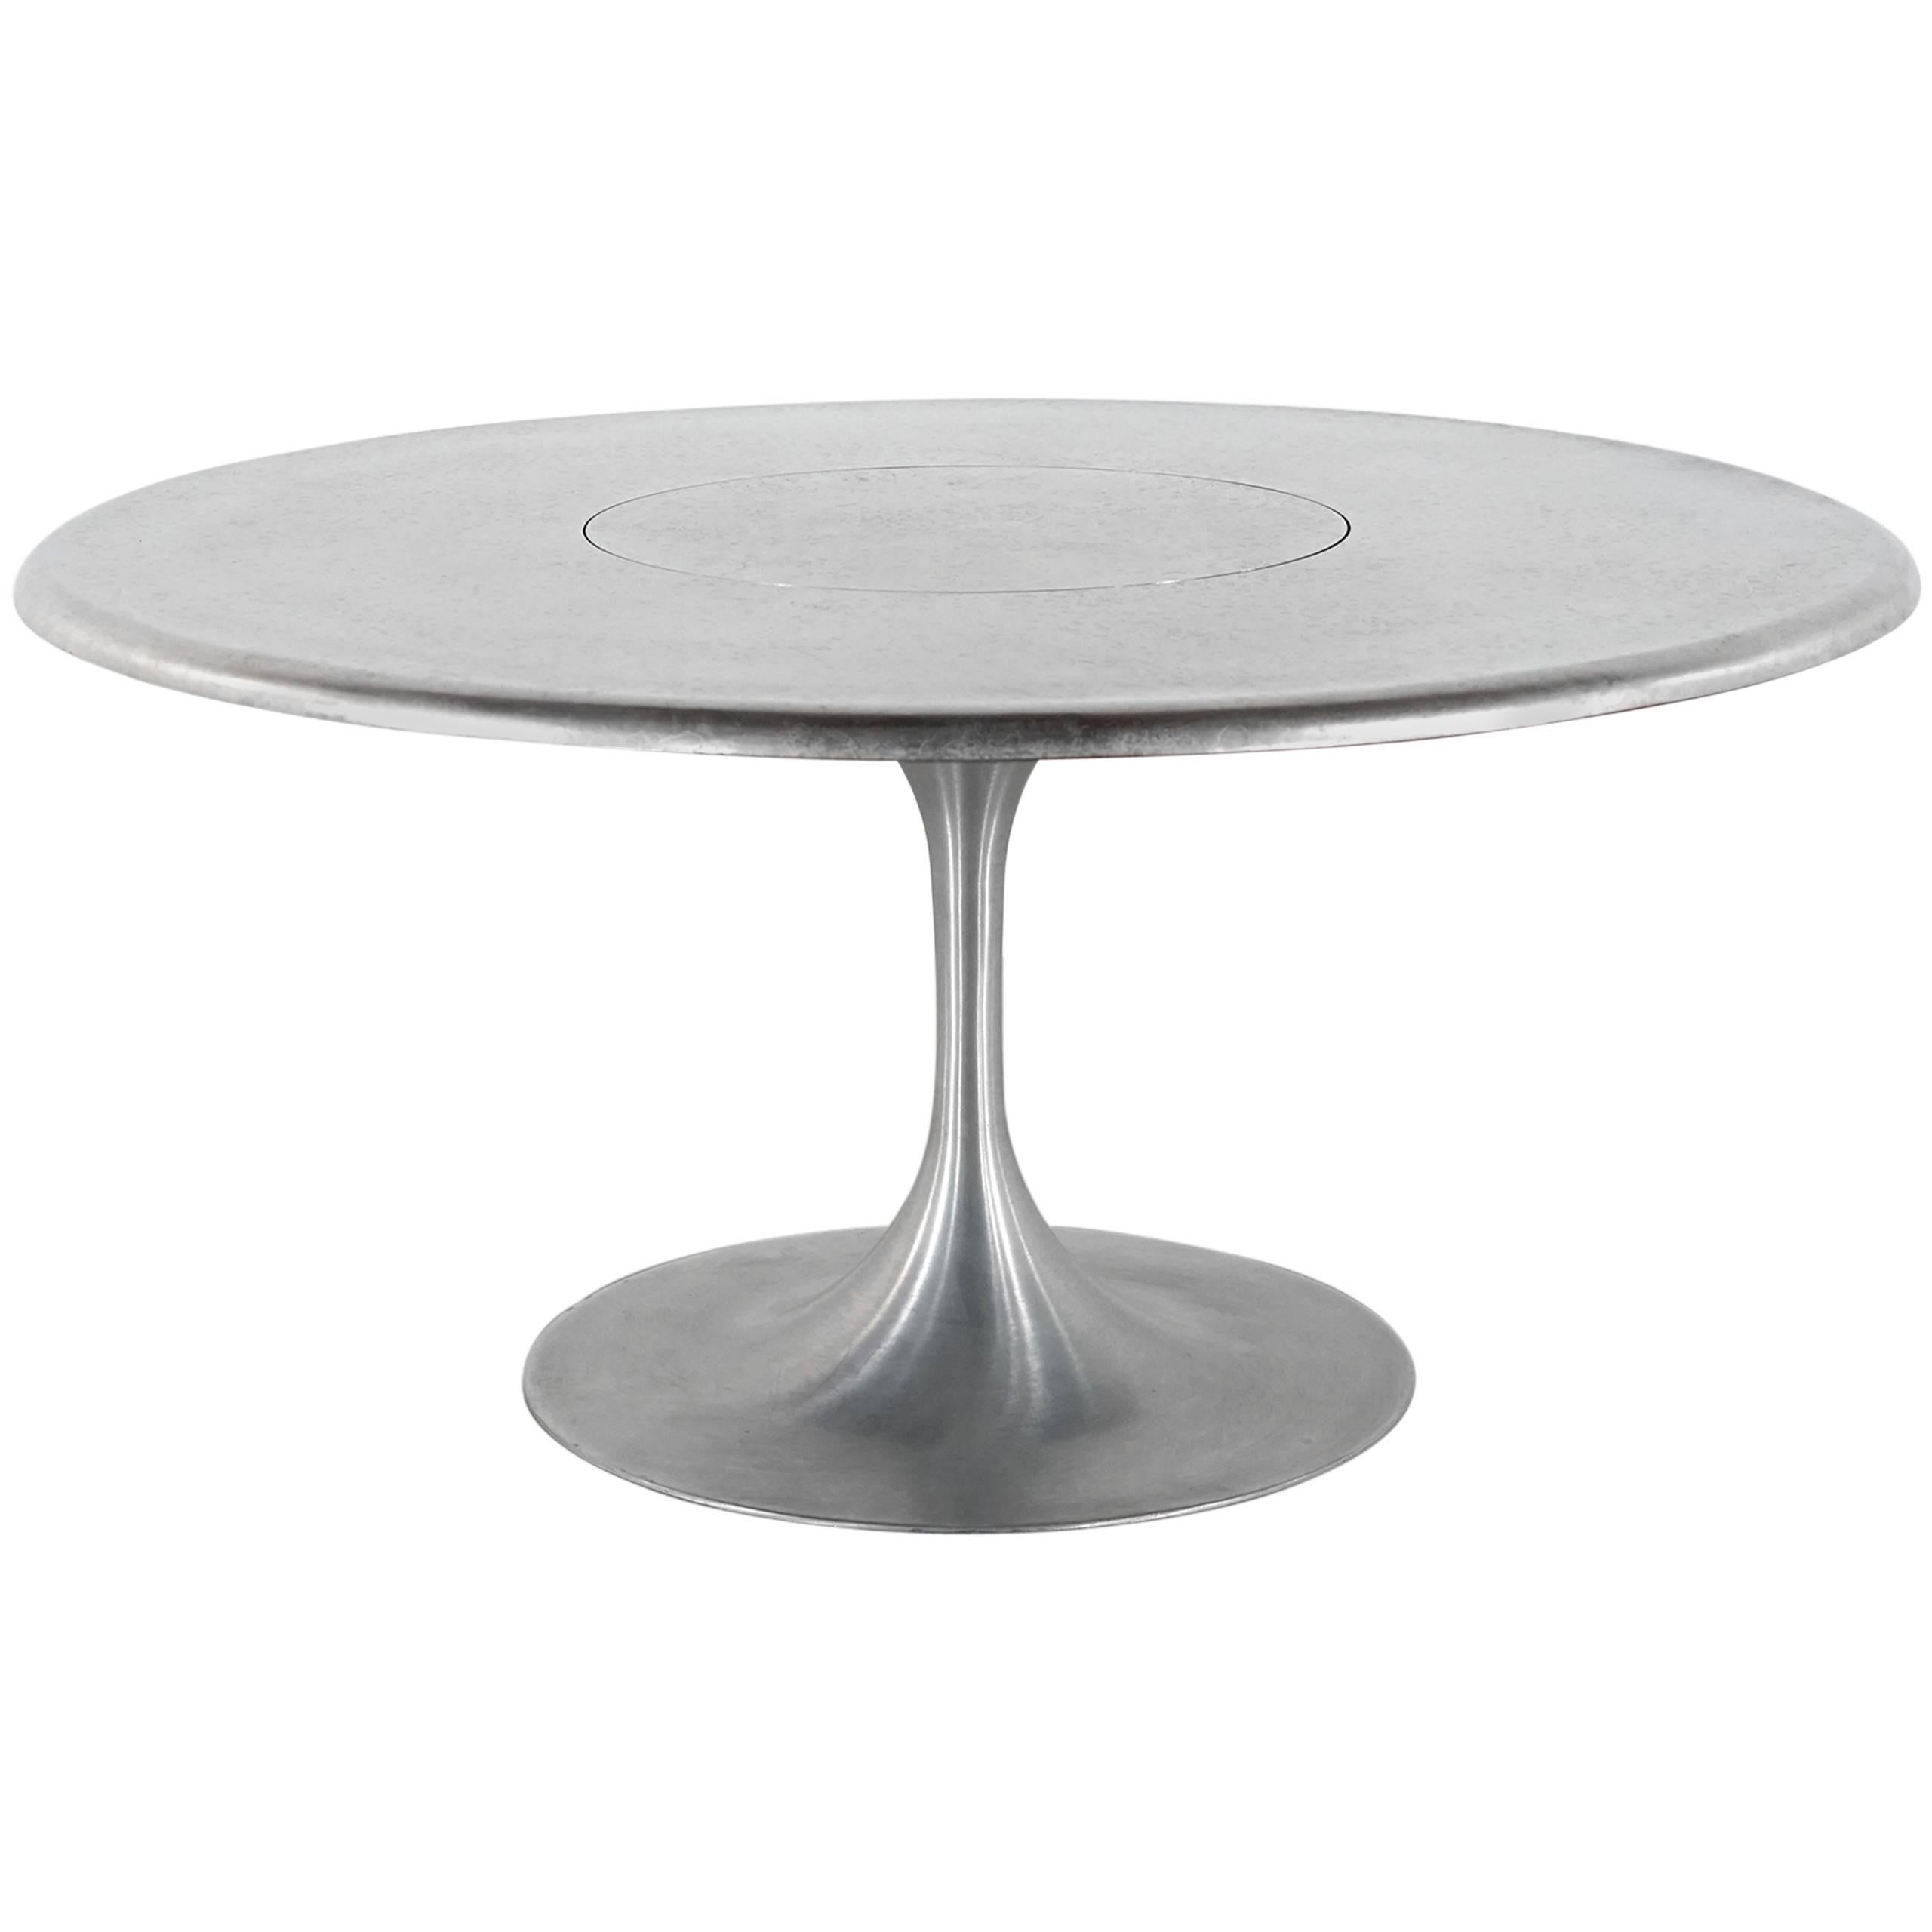 Heinz Lilienthal, 1969, Large Dining Table Swiveling Centerplate and Etched Top